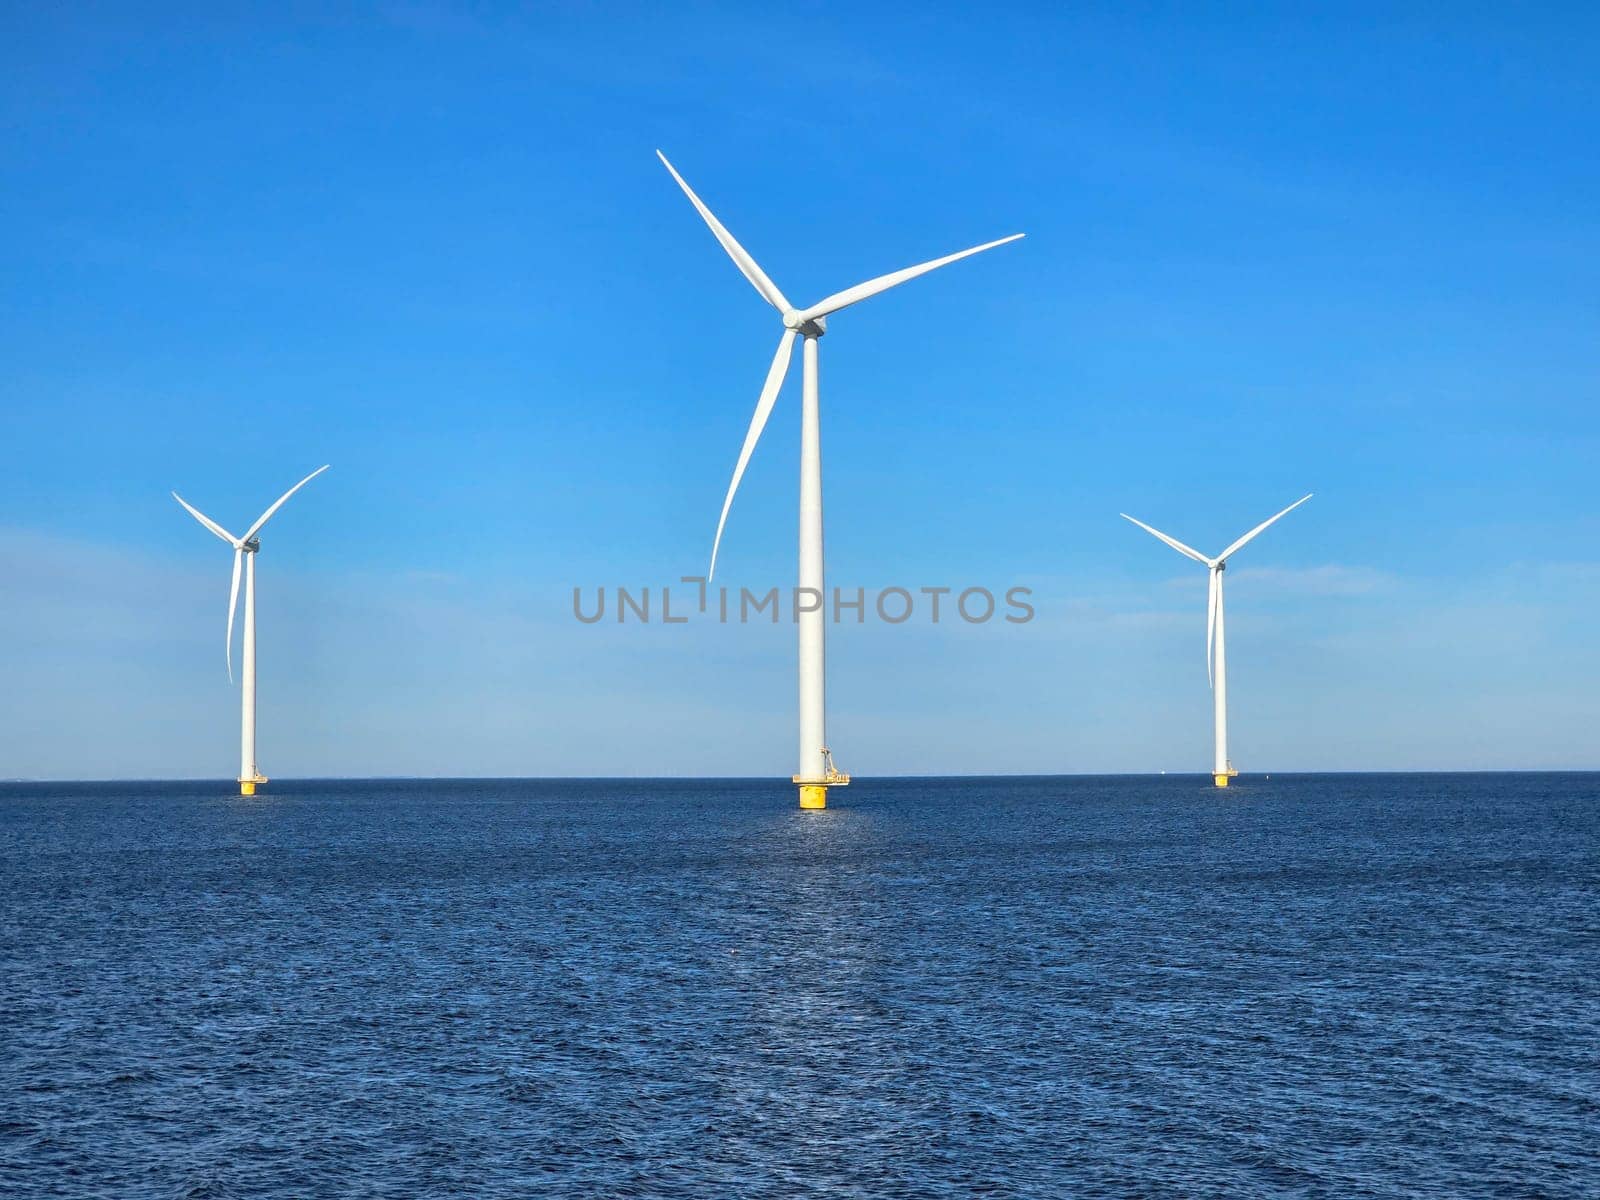 Windmill park in the ocean, view of windmill turbines on a Dutch dike generating green energy electrically, windmills isolated at sea in the Netherlands. Energy transition